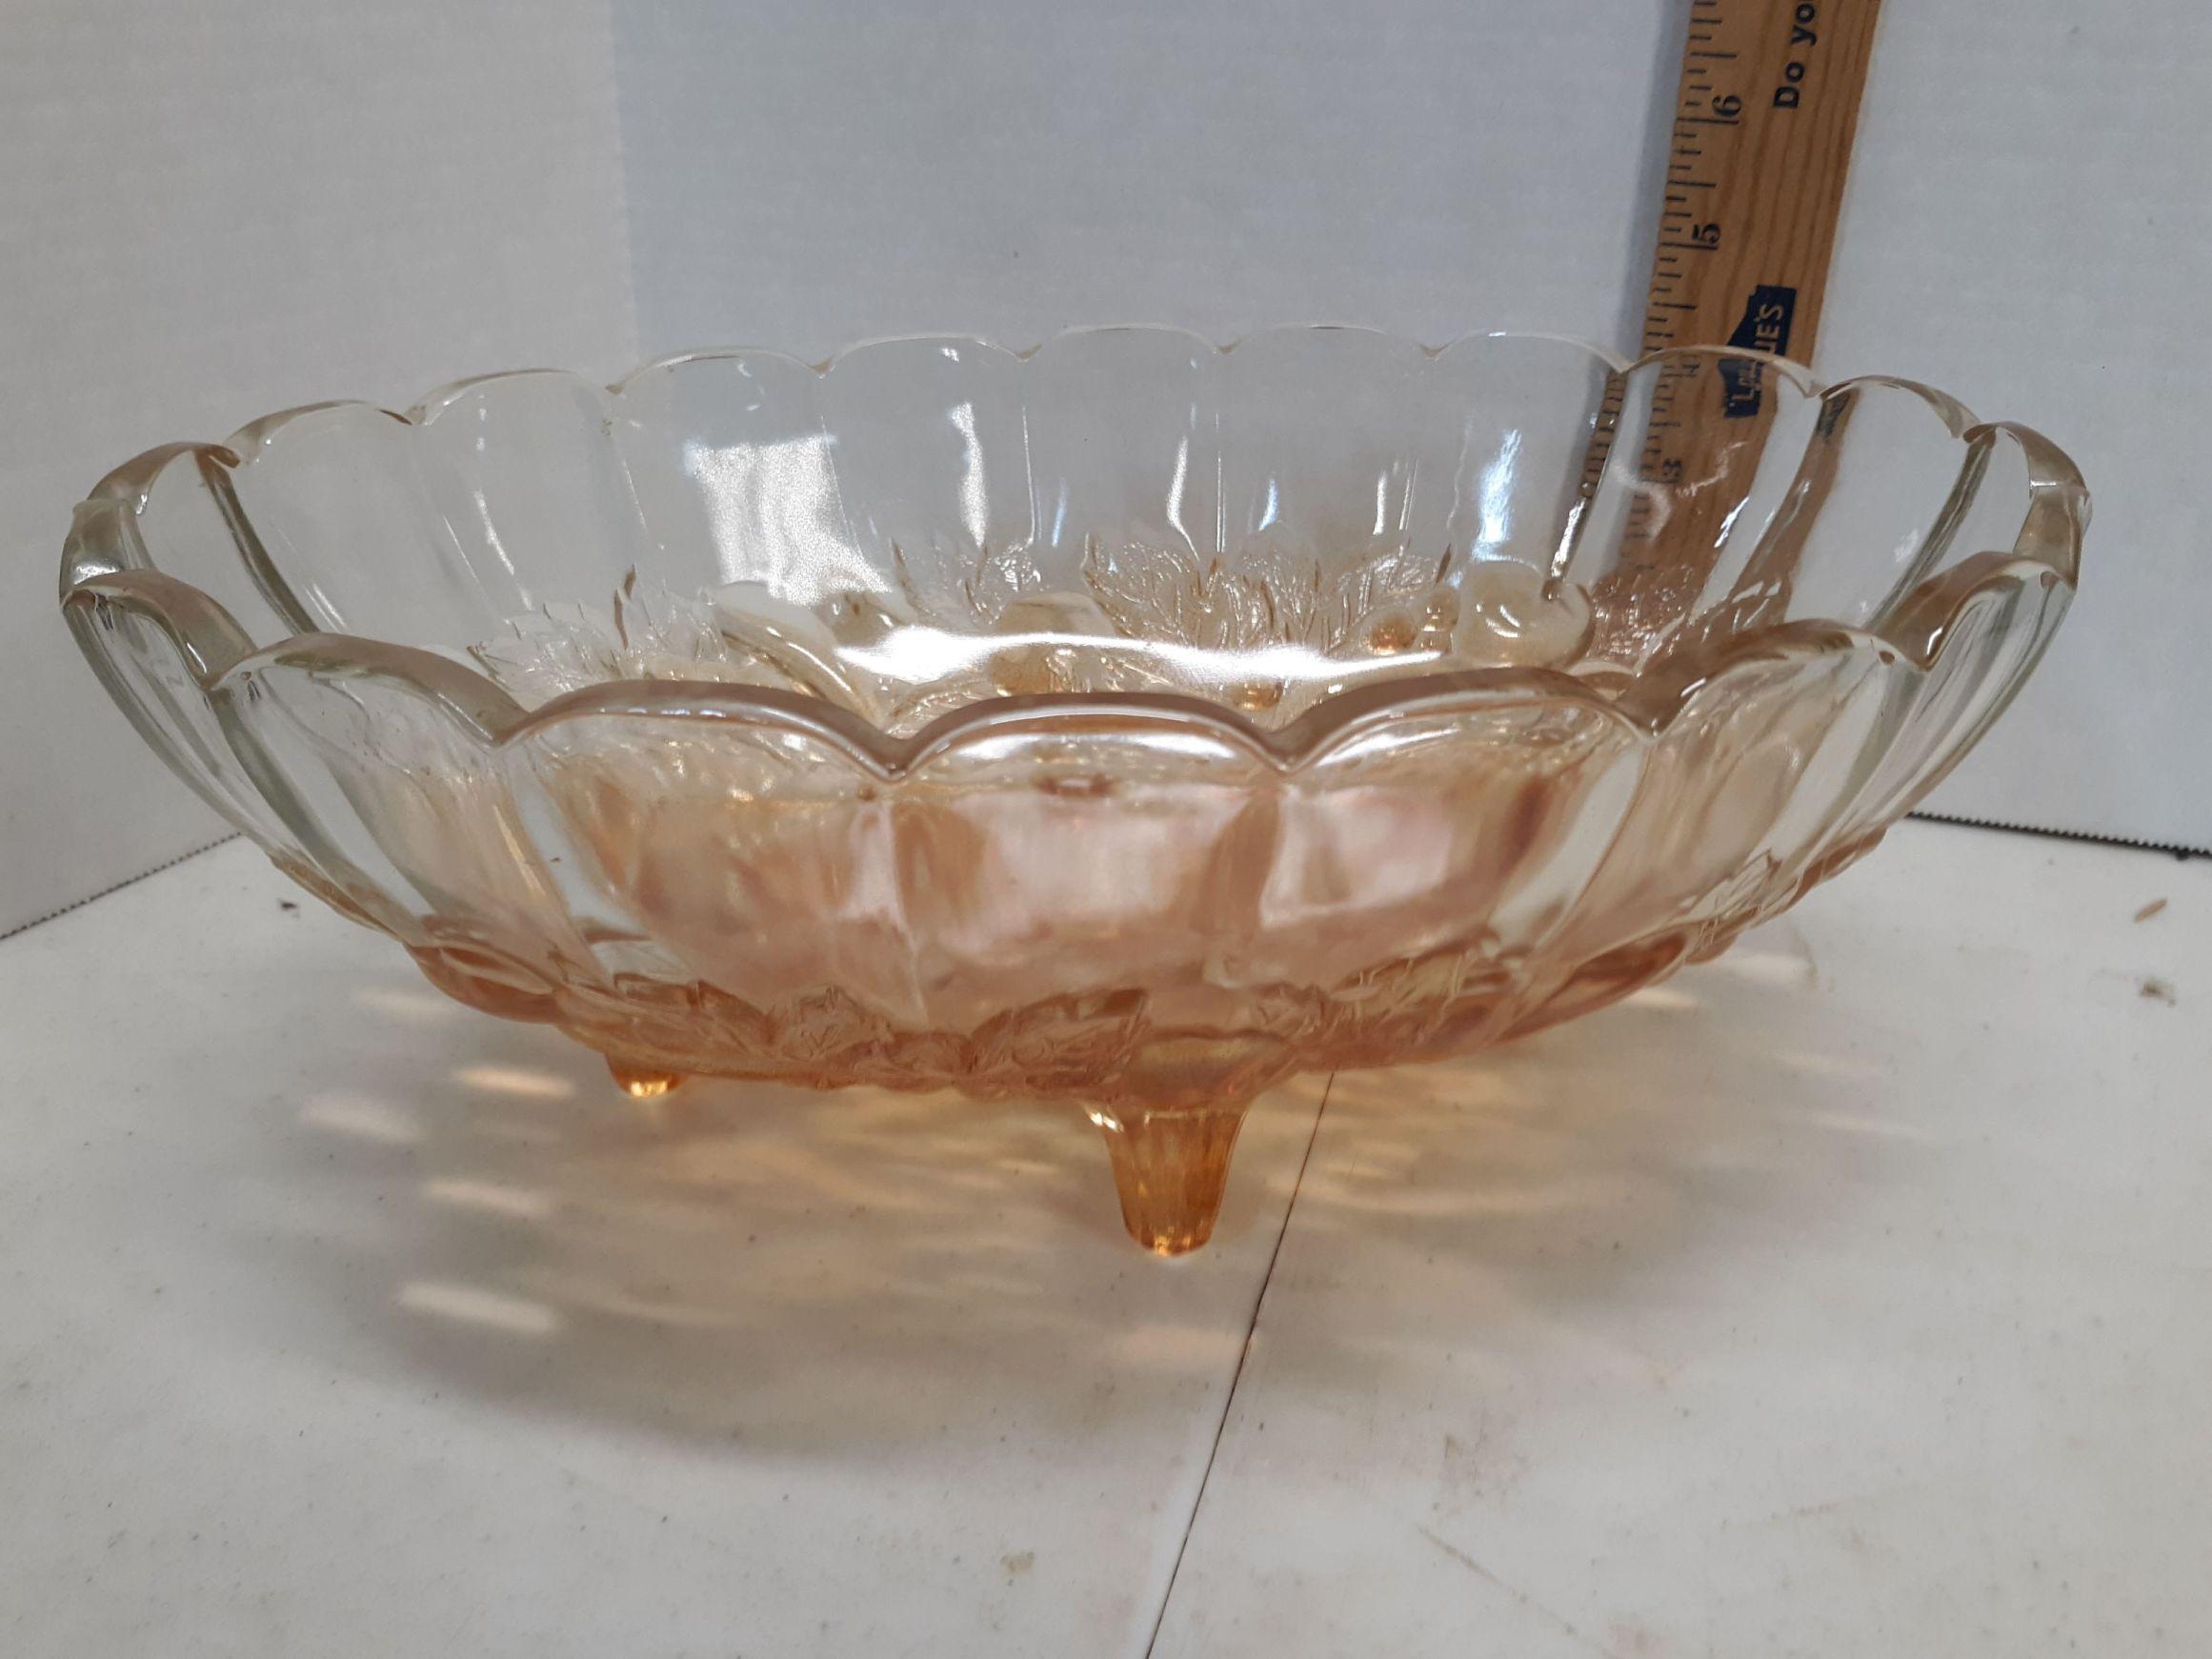 Two glass bowls, Indiana glass fruit bowl and yellow depression glass bowl